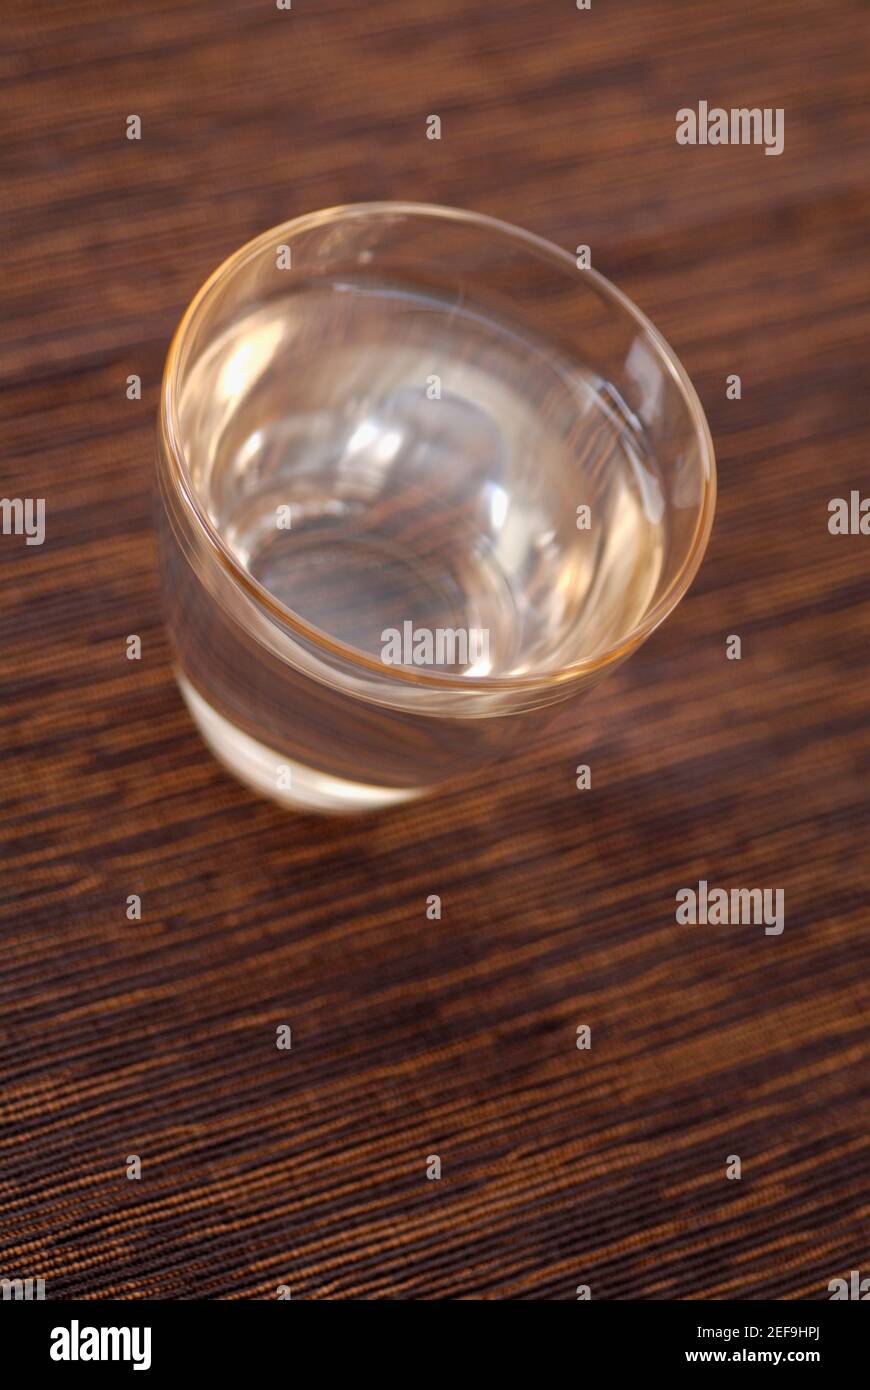 High angle view of a glass of water Stock Photo